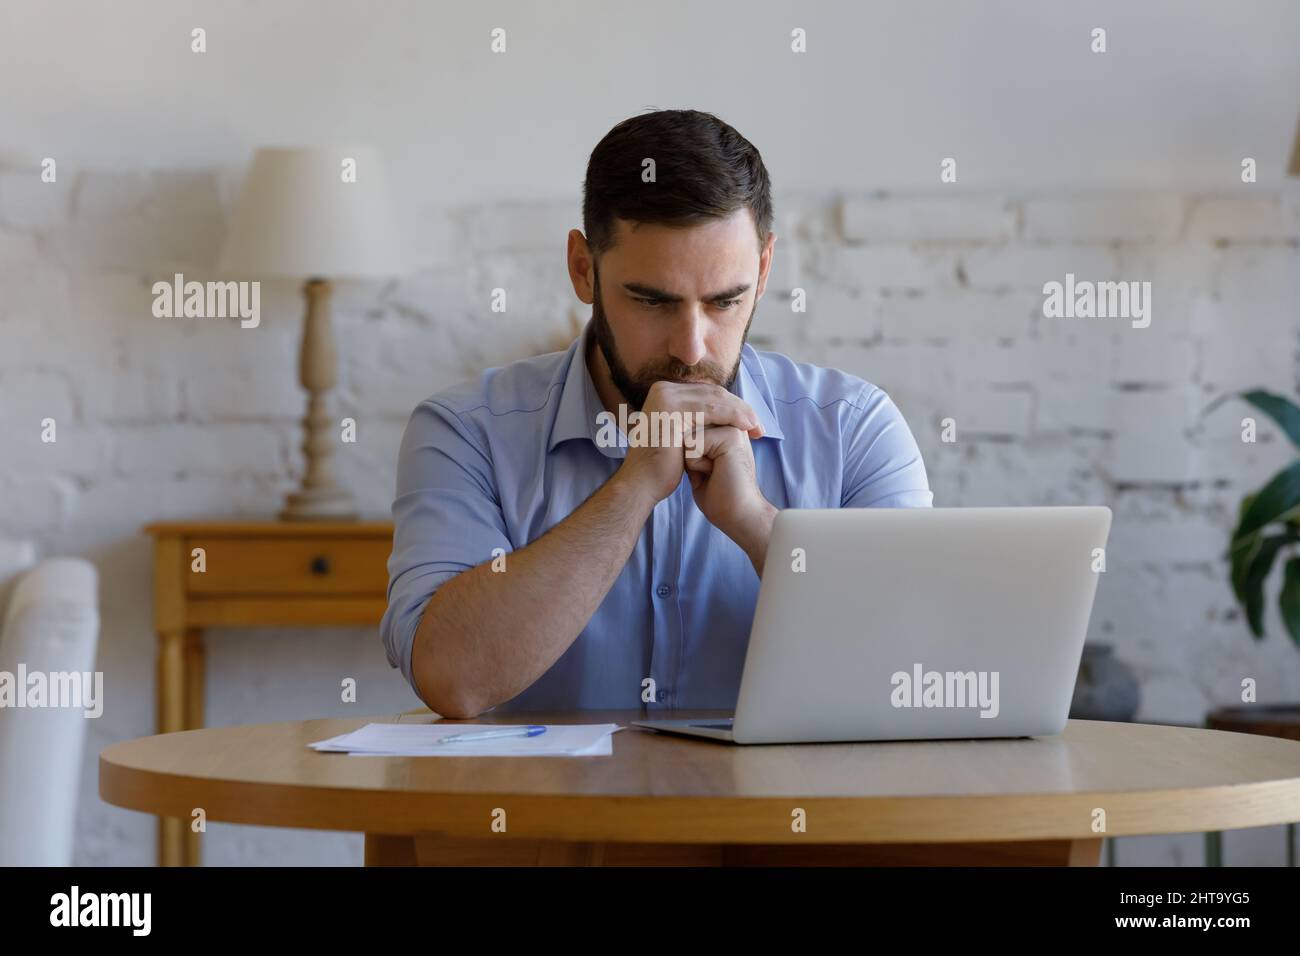 Serious man read e-mail on laptop looks concerned or puzzled Stock Photo